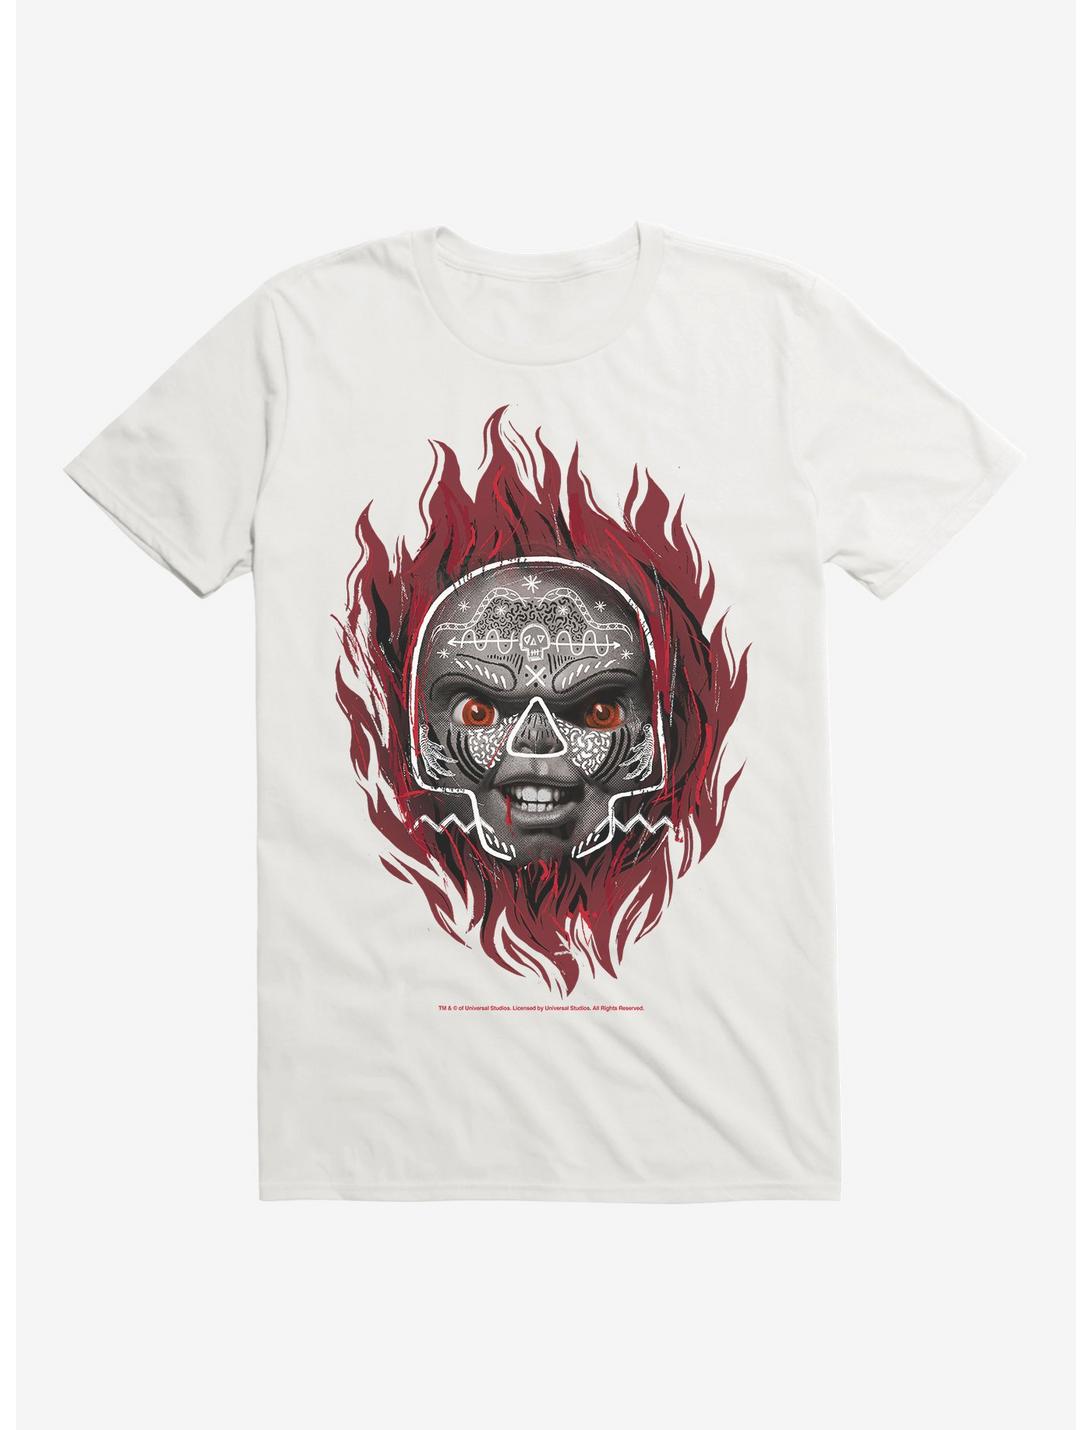 Child's Play Chucky Skull Outline T-Shirt, , hi-res